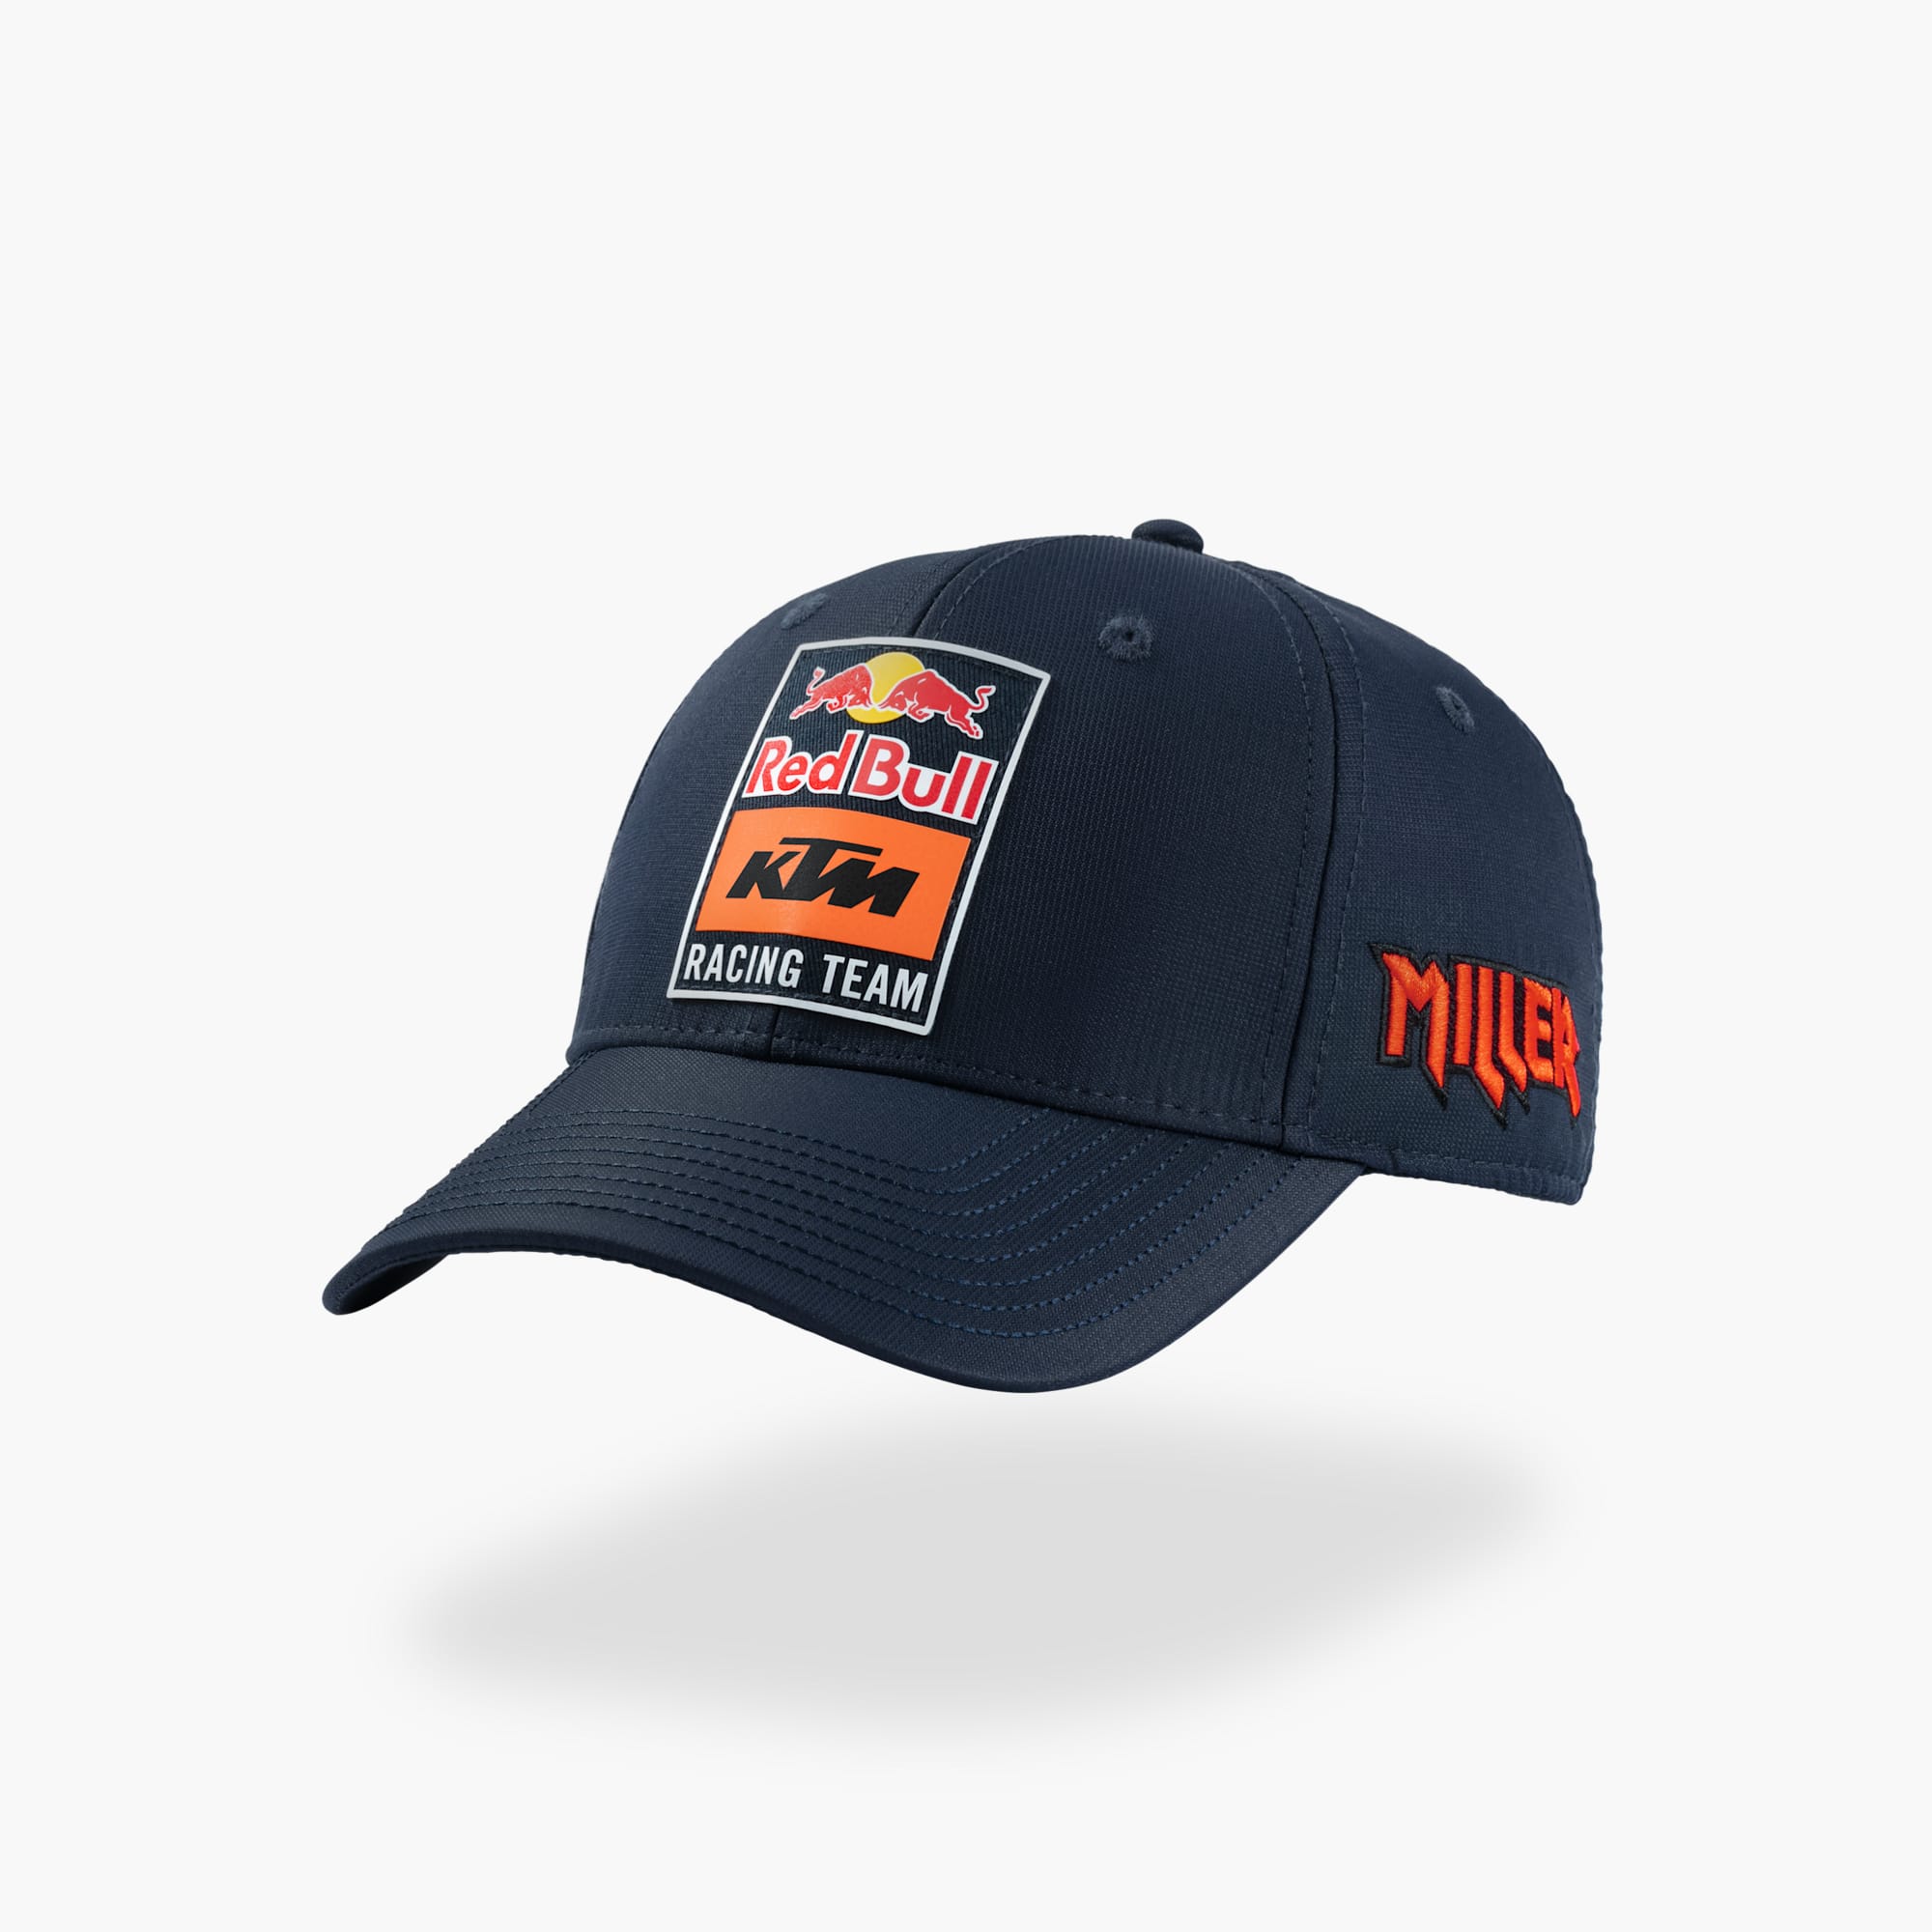 Red Bull KTM Racing Team Shop: Jack Miller Curved Cap | only here at ...